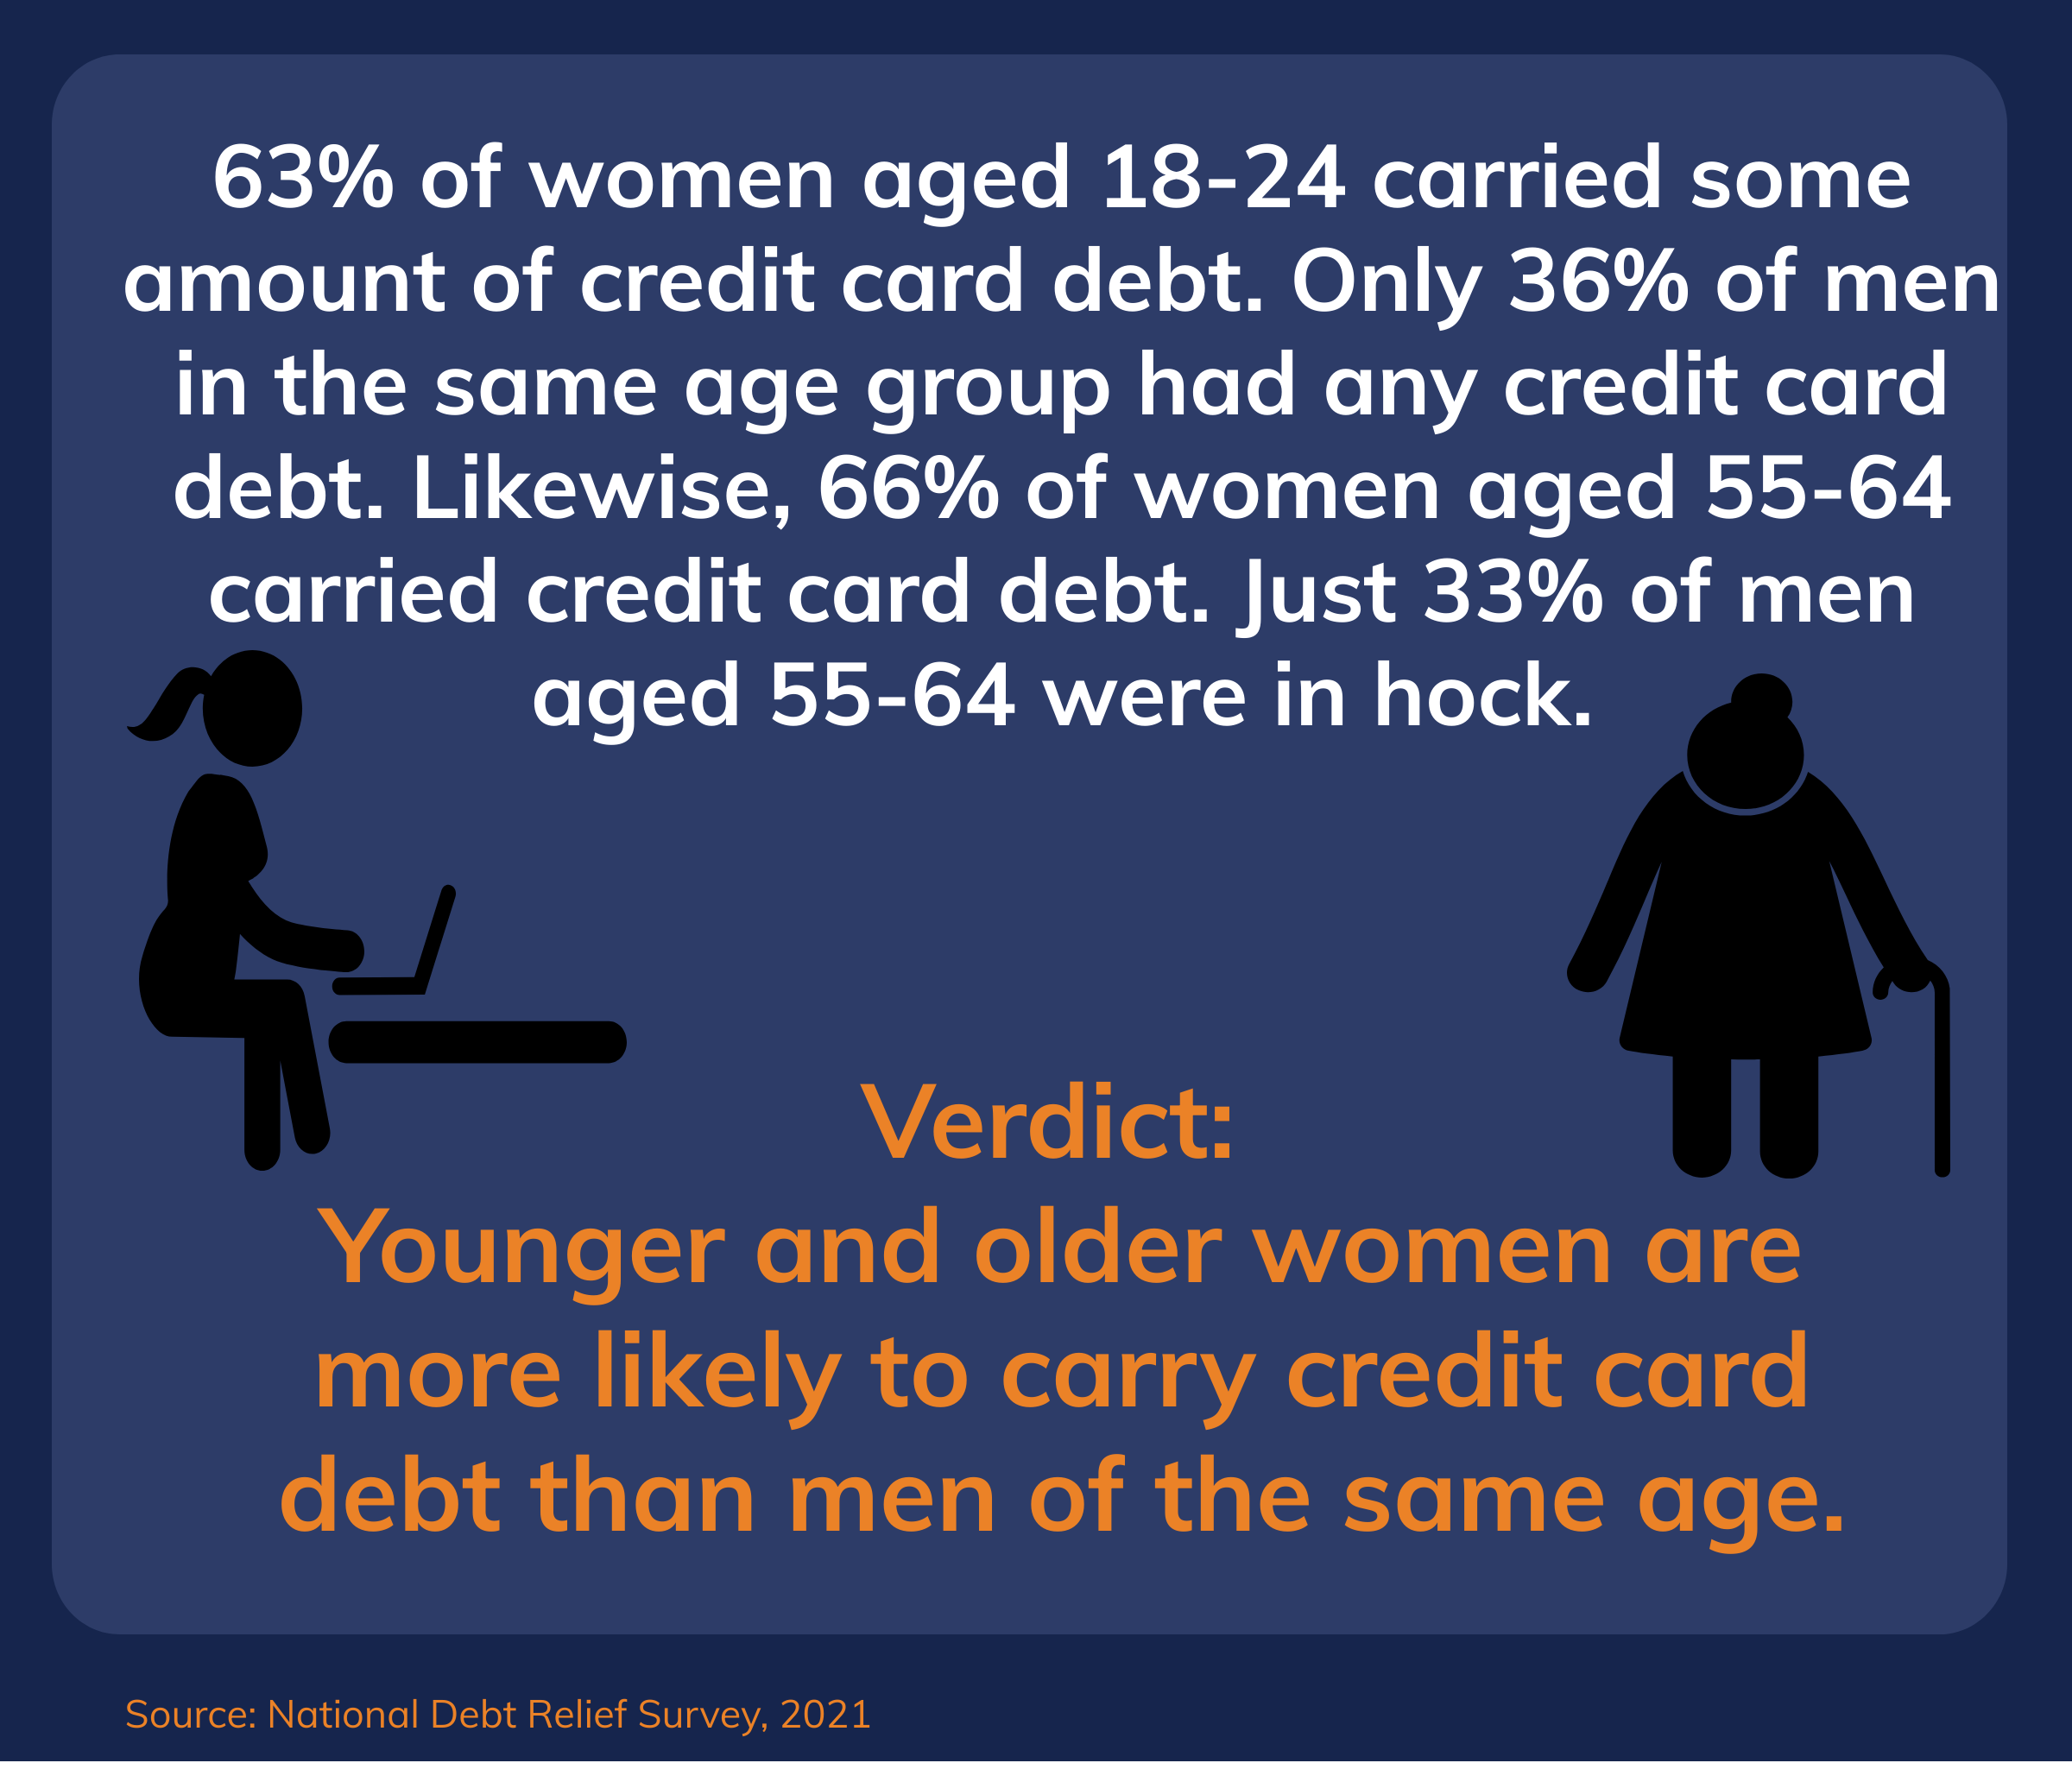 Graphic image discussing women and credit card debt statistics